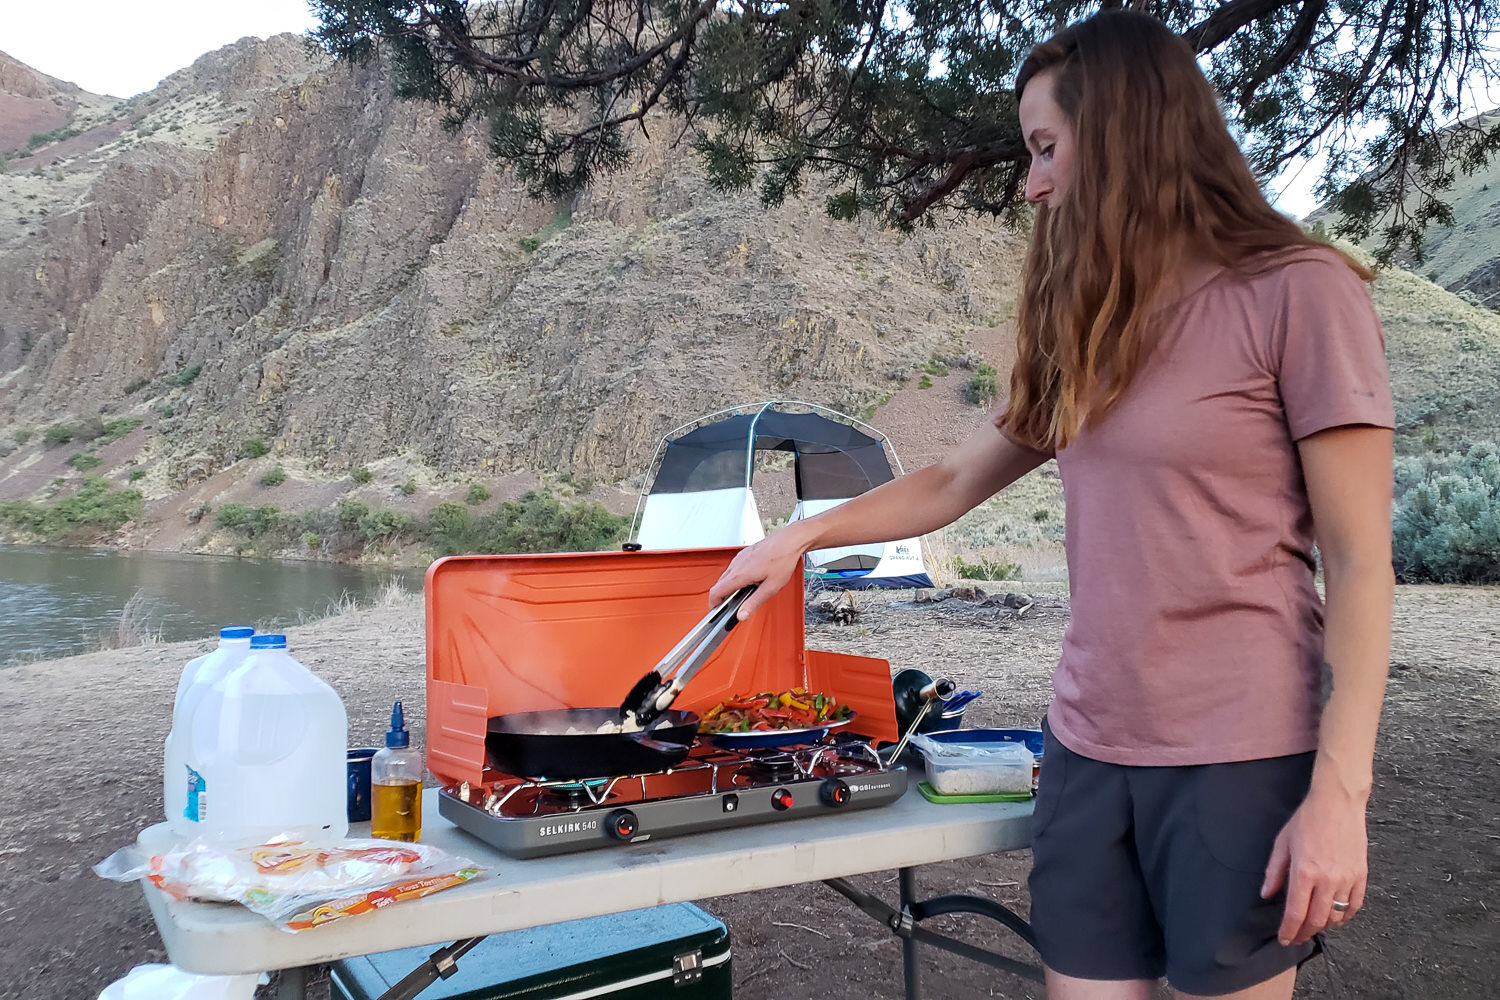 The Best Camping Cookware for Making Delicious Meals in the